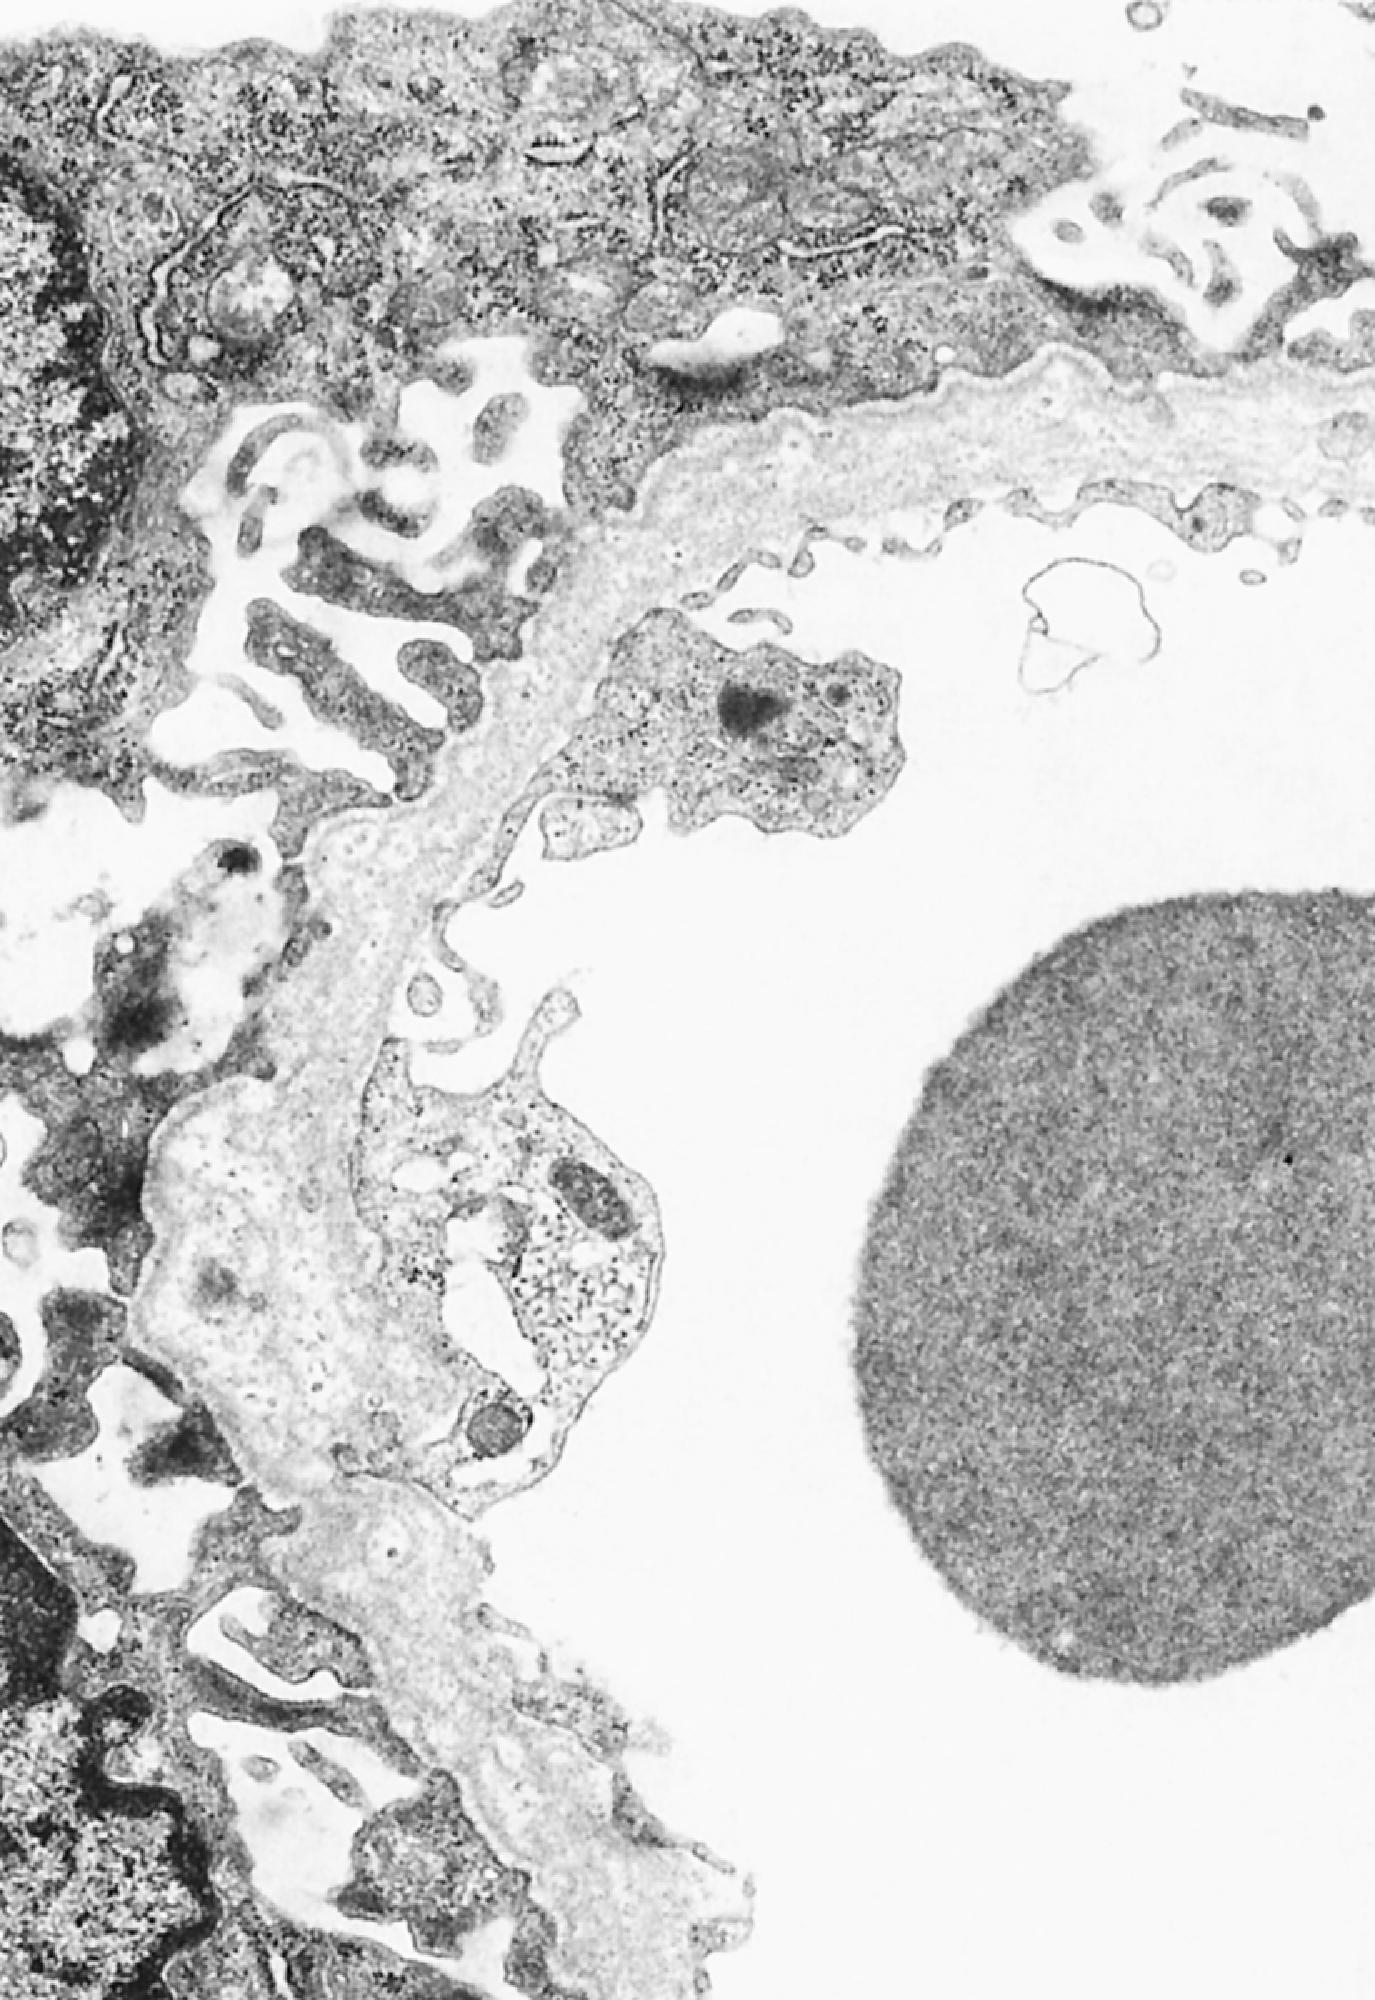 Fig. 41.2, High-resolution electron micrograph shows a glomerular basement membrane from a patient with Alport syndrome that varies in thickness. It is split into several layers, which in some areas are separated by lucencies containing small, dense granules. (Courtesy Dr. Theodore J. Pysher.)